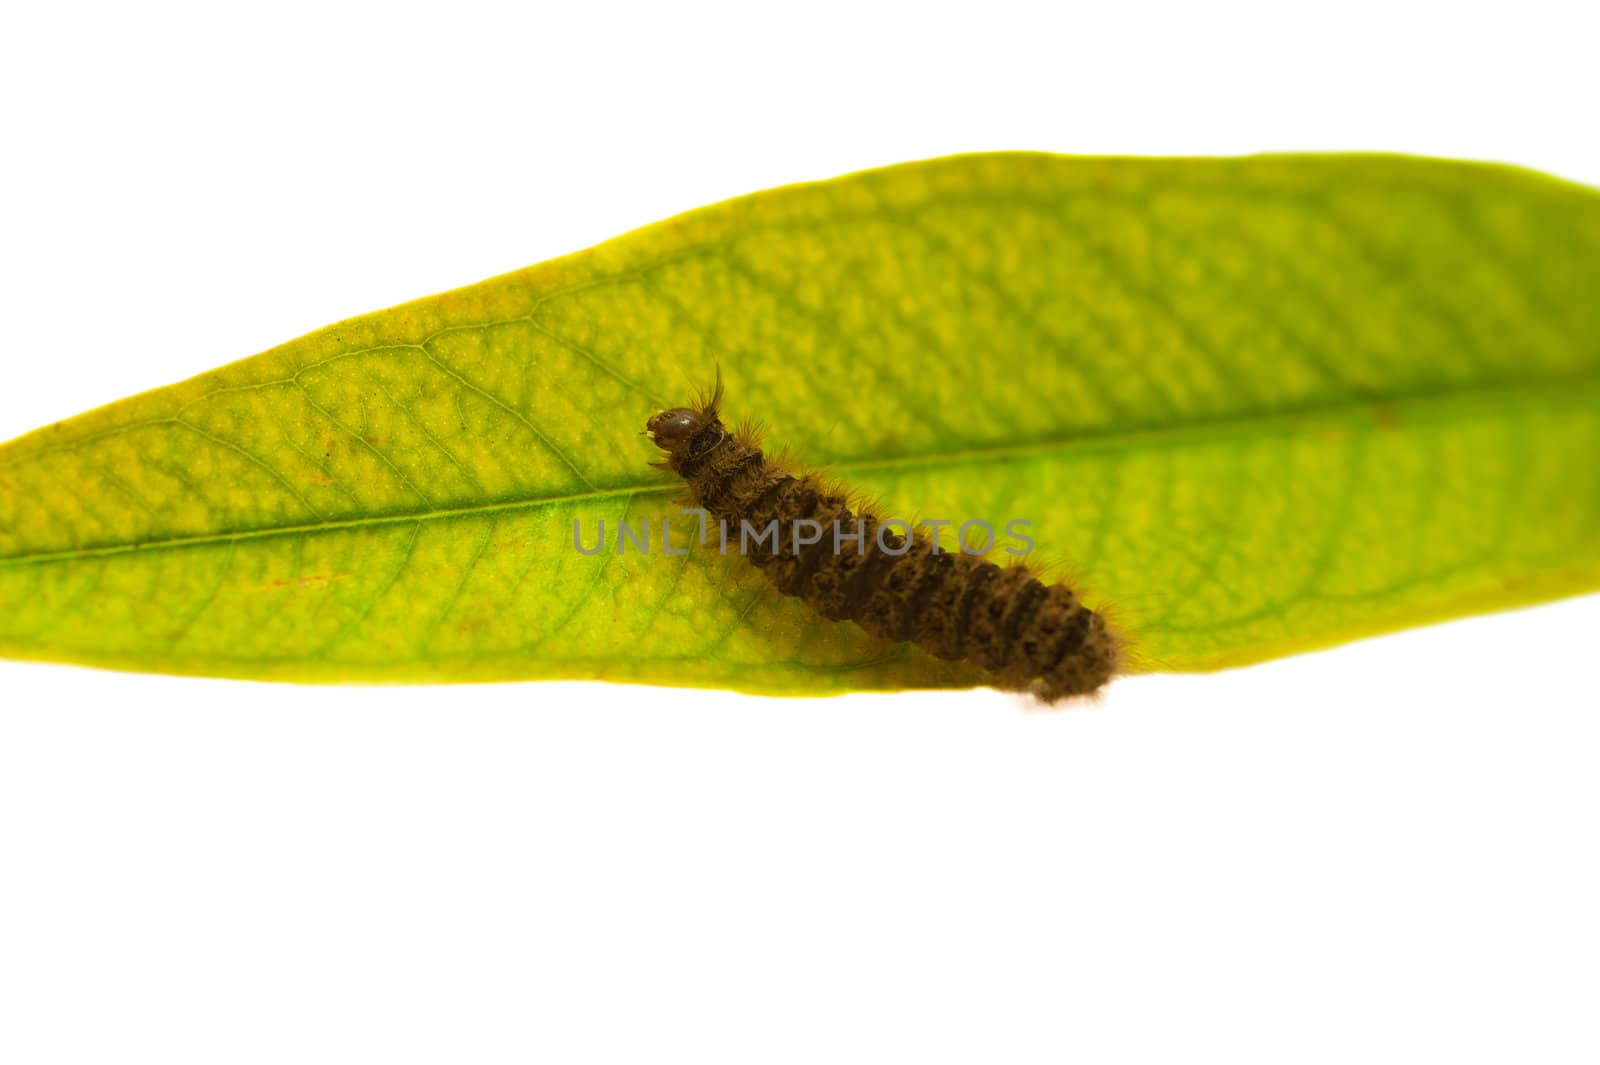 Caterpillar on the green leaf by oguzdkn